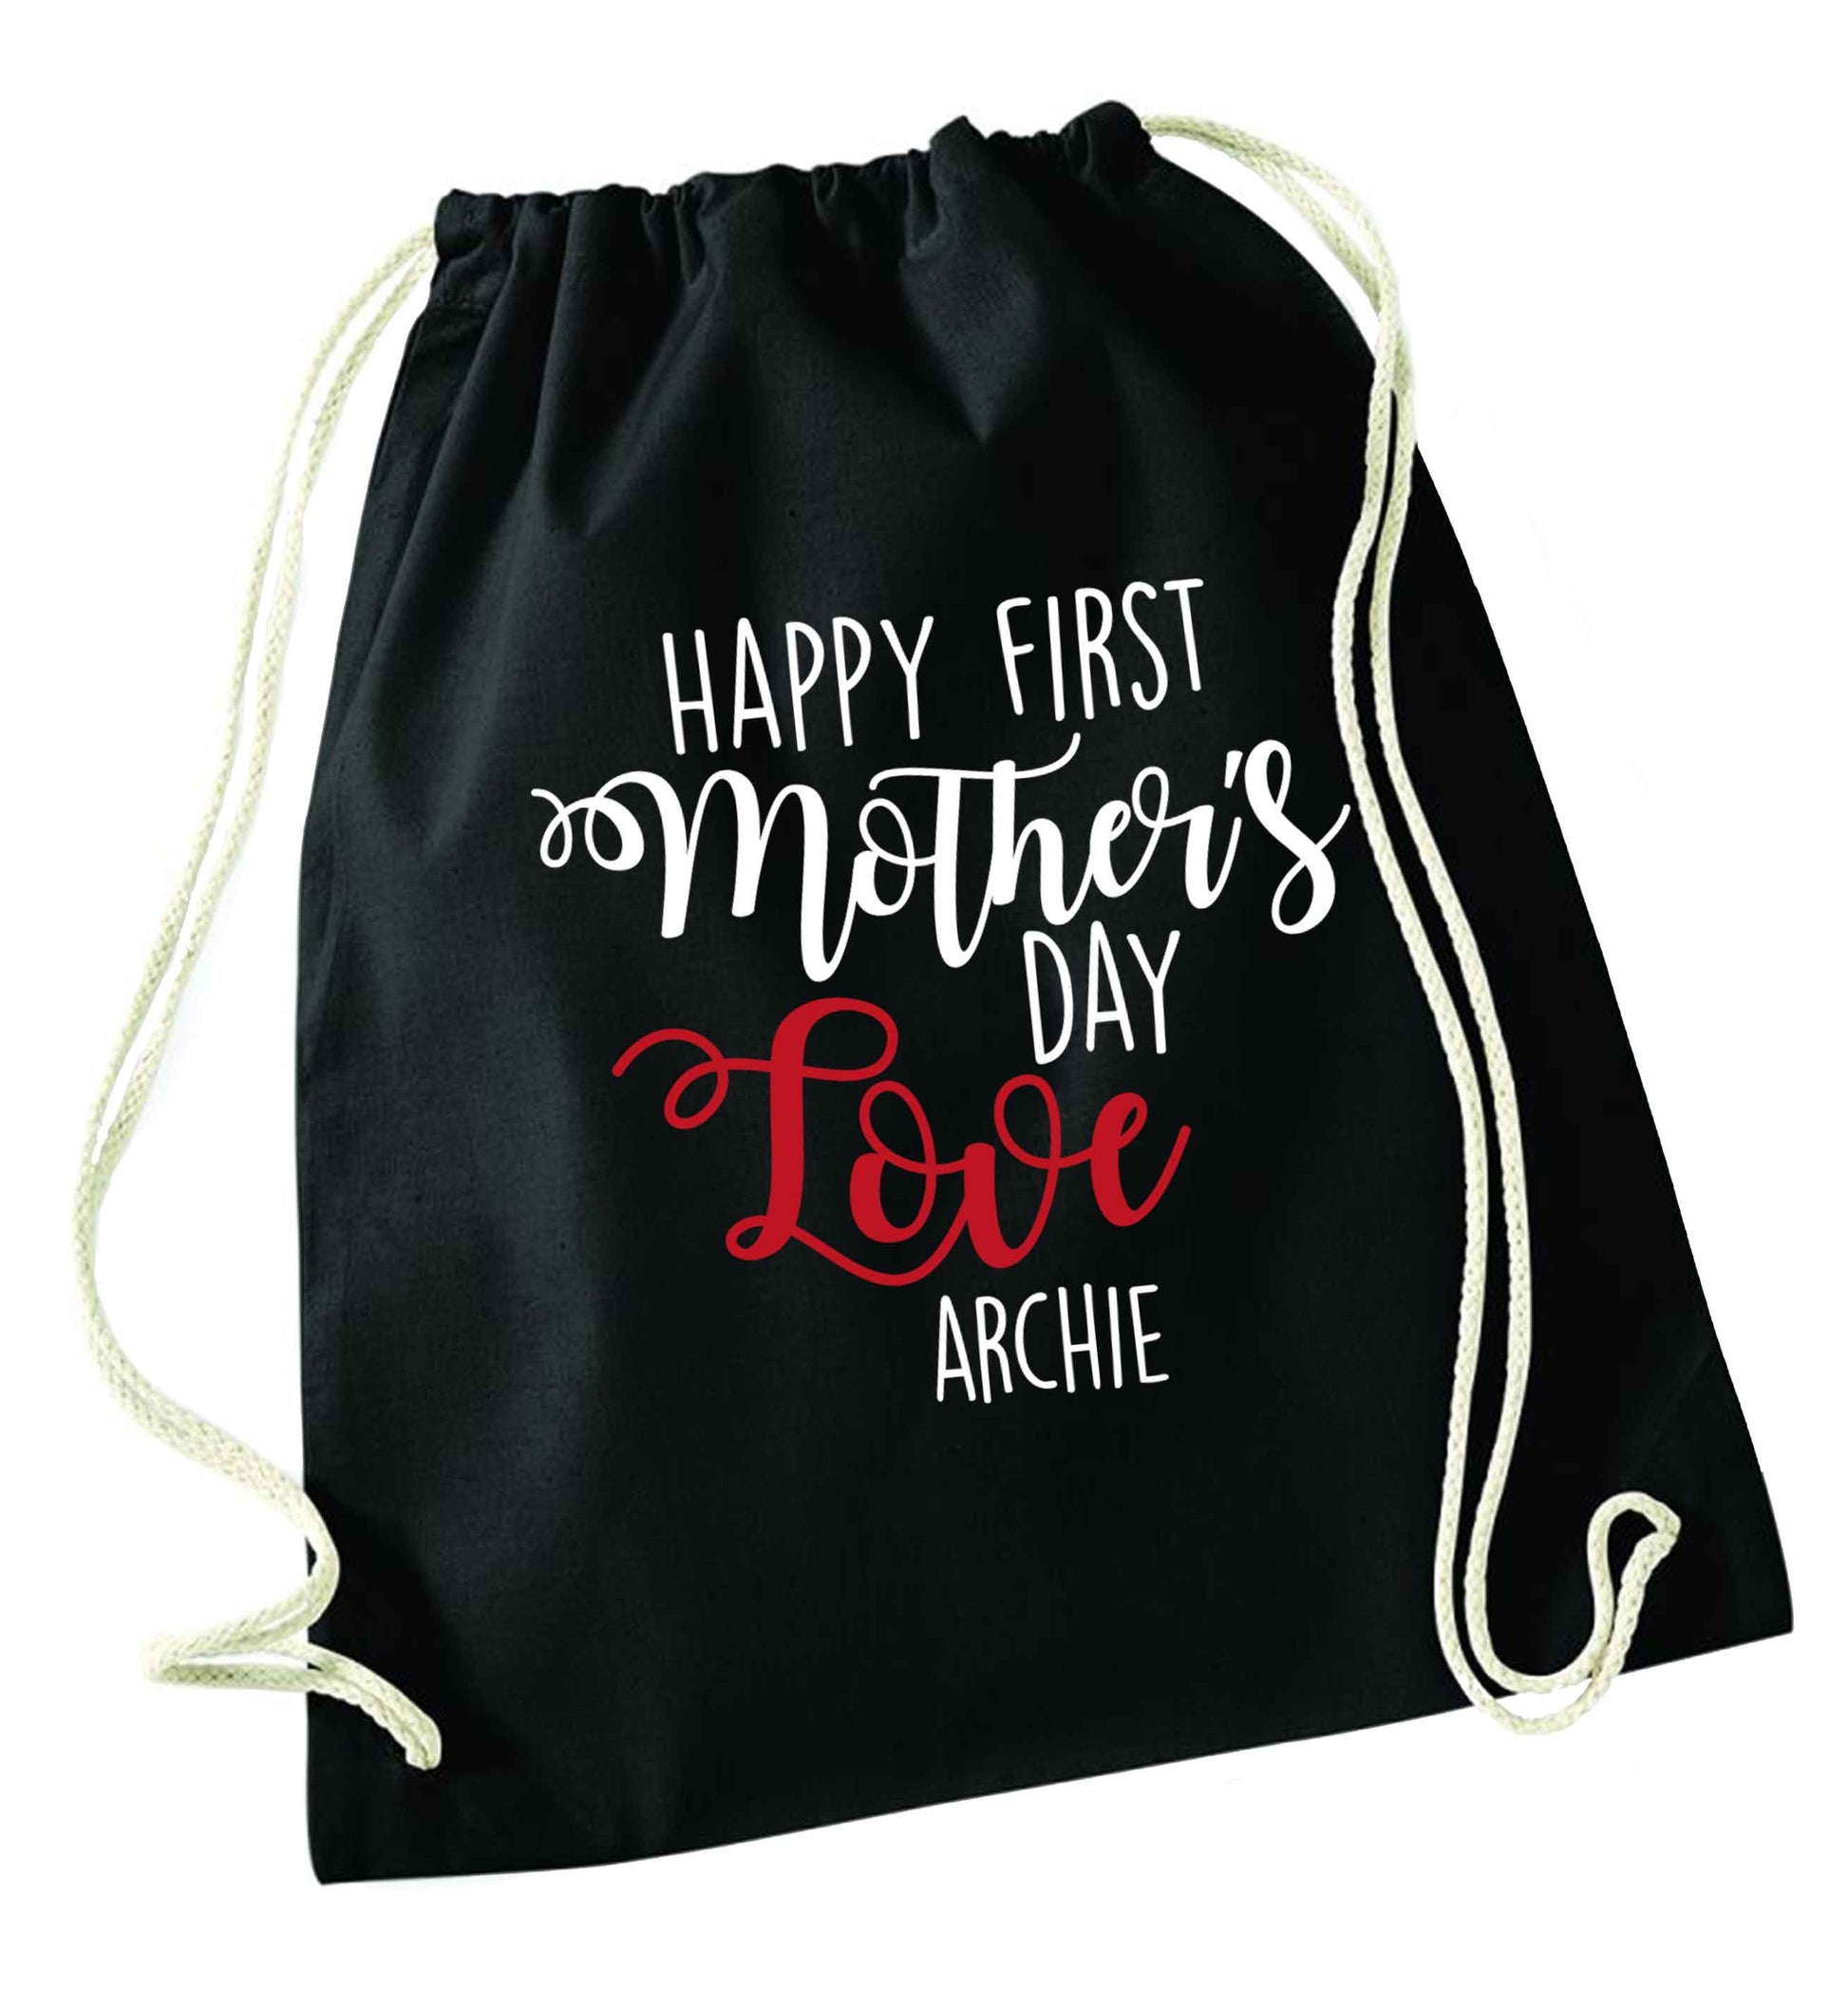 Mummy's first mother's day! black drawstring bag